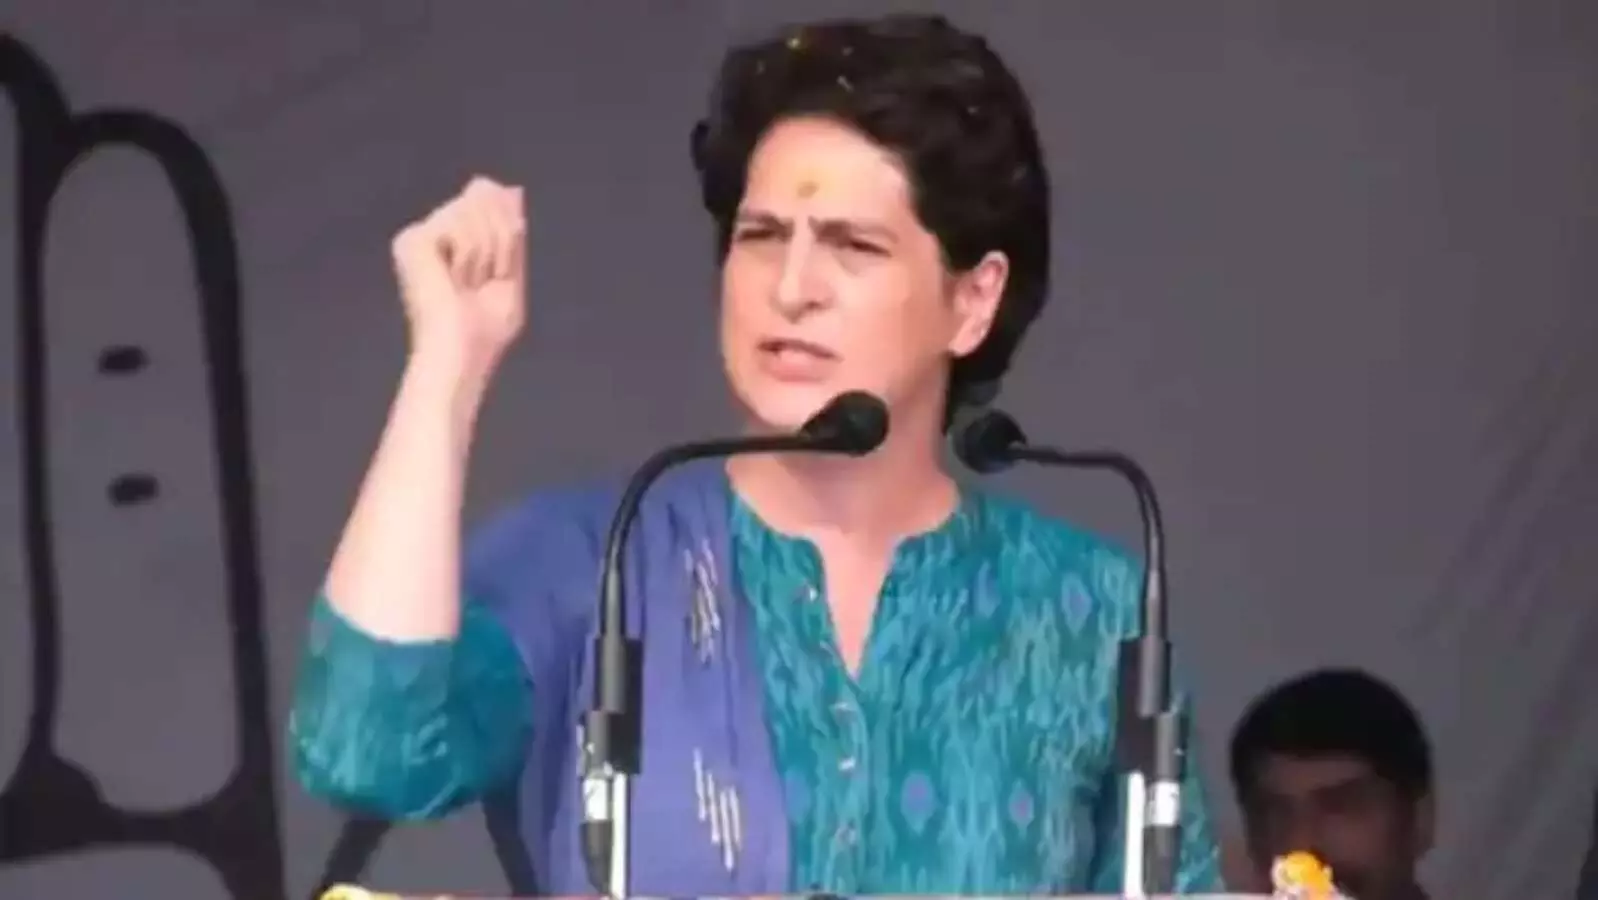 himachal election 2022 priyanka gandhi said if congress govt formed will give 5 lakh jobs in 5 years